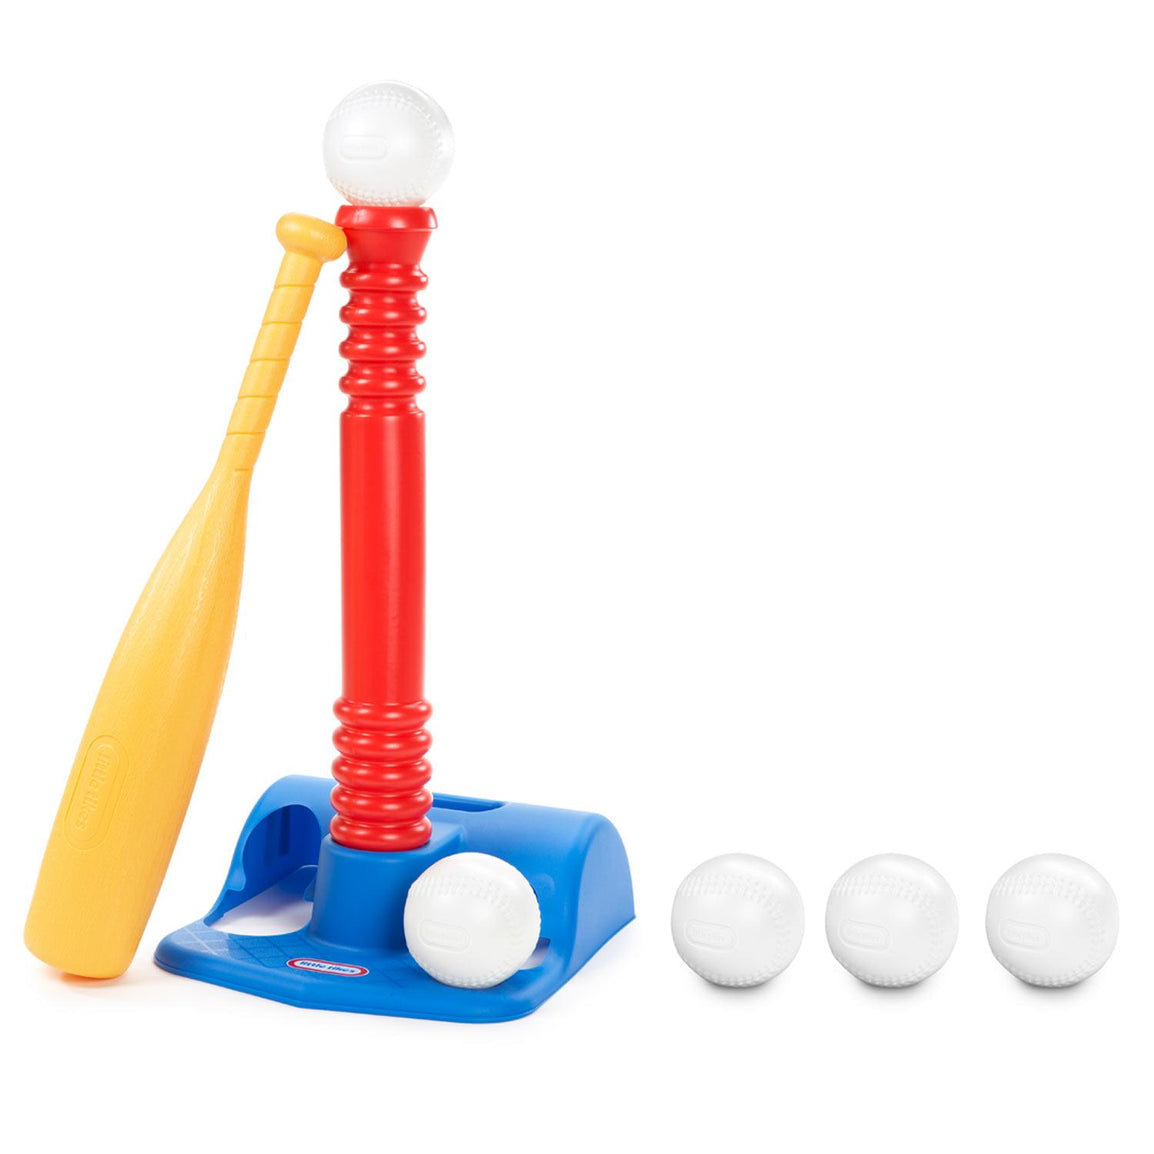 TotSports™ T-Ball Set with 5 Balls - Amazon Exclusive - Official Little Tikes Website